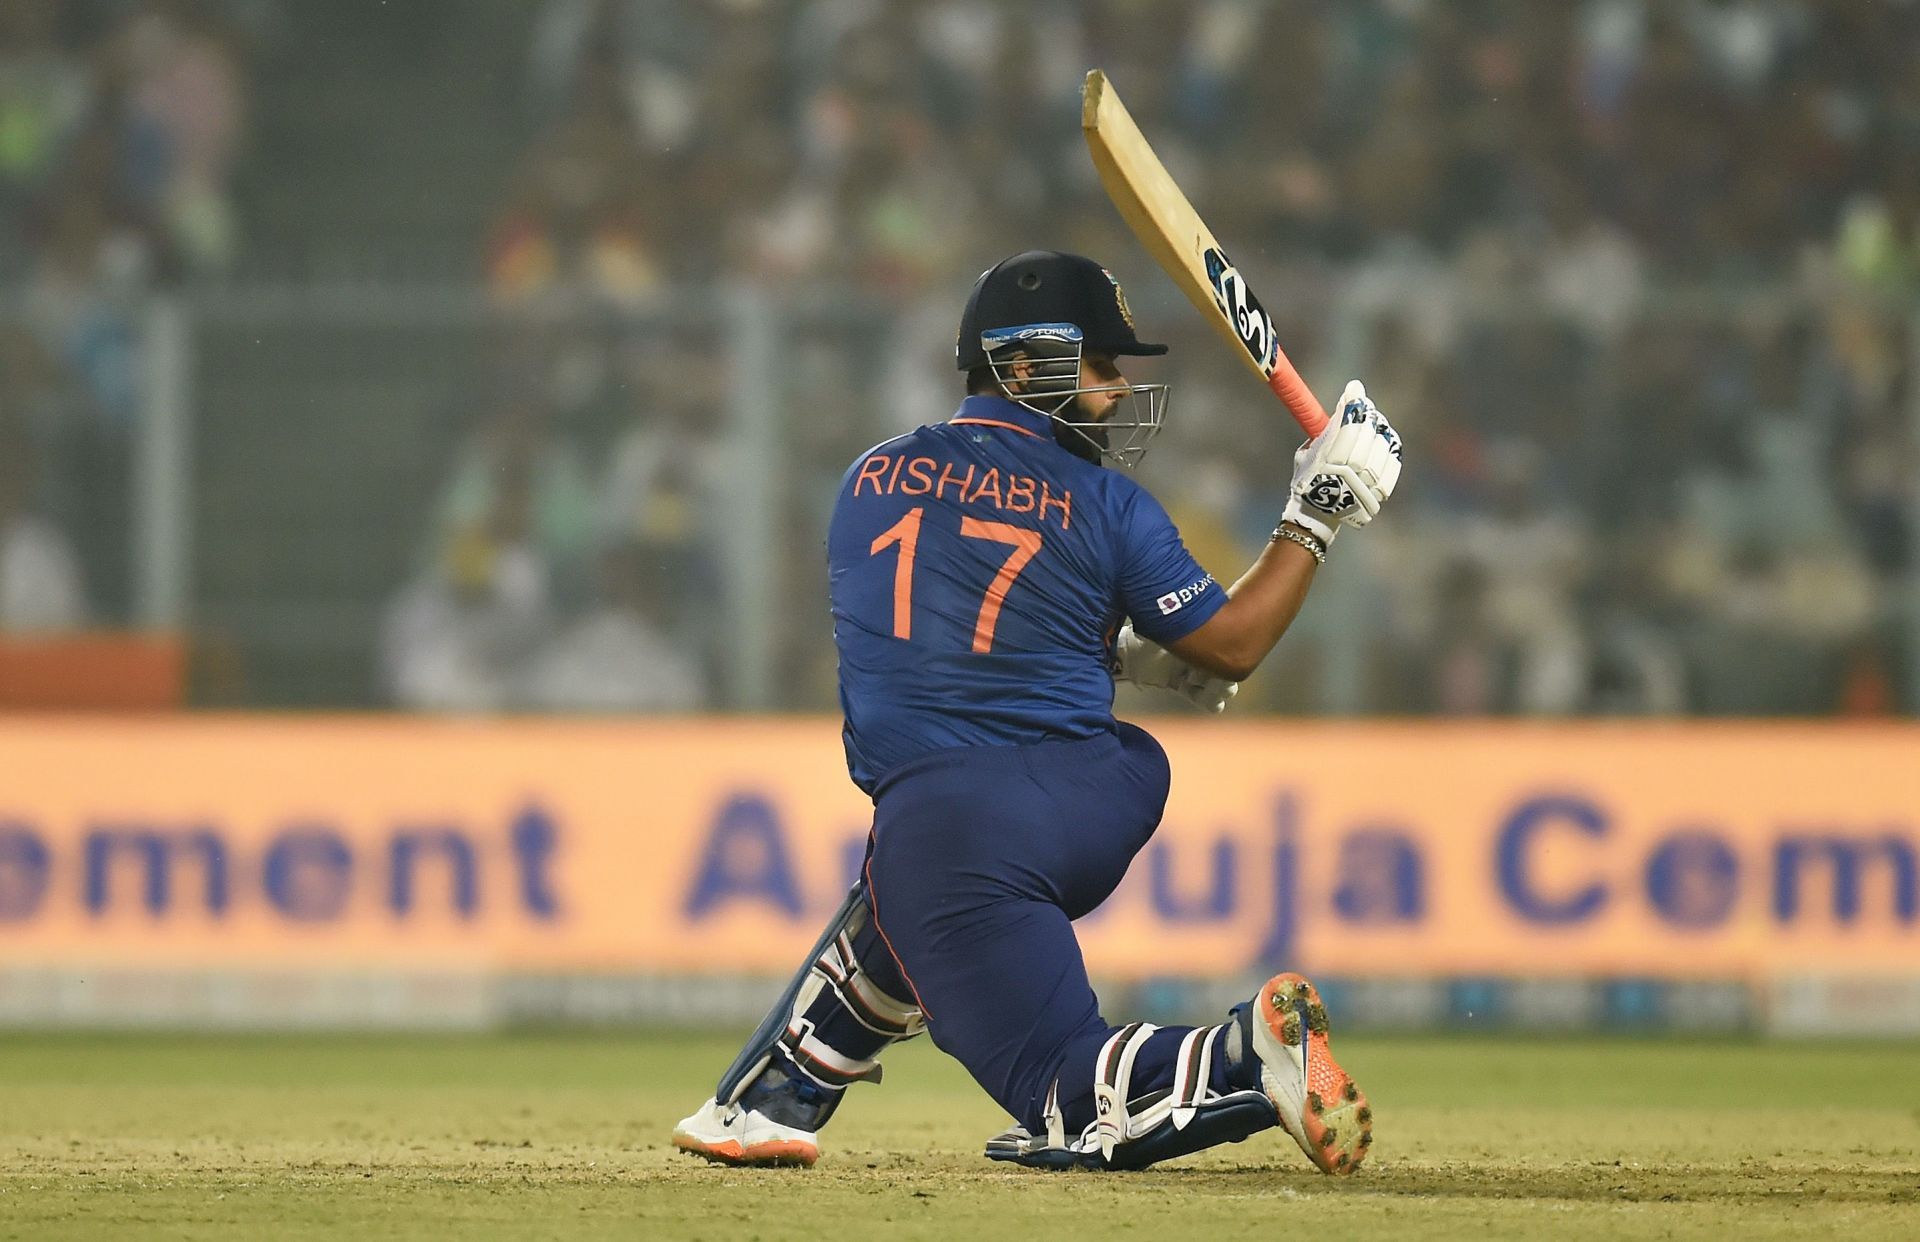 Rishabh Pant opened in the second ODI against West Indies